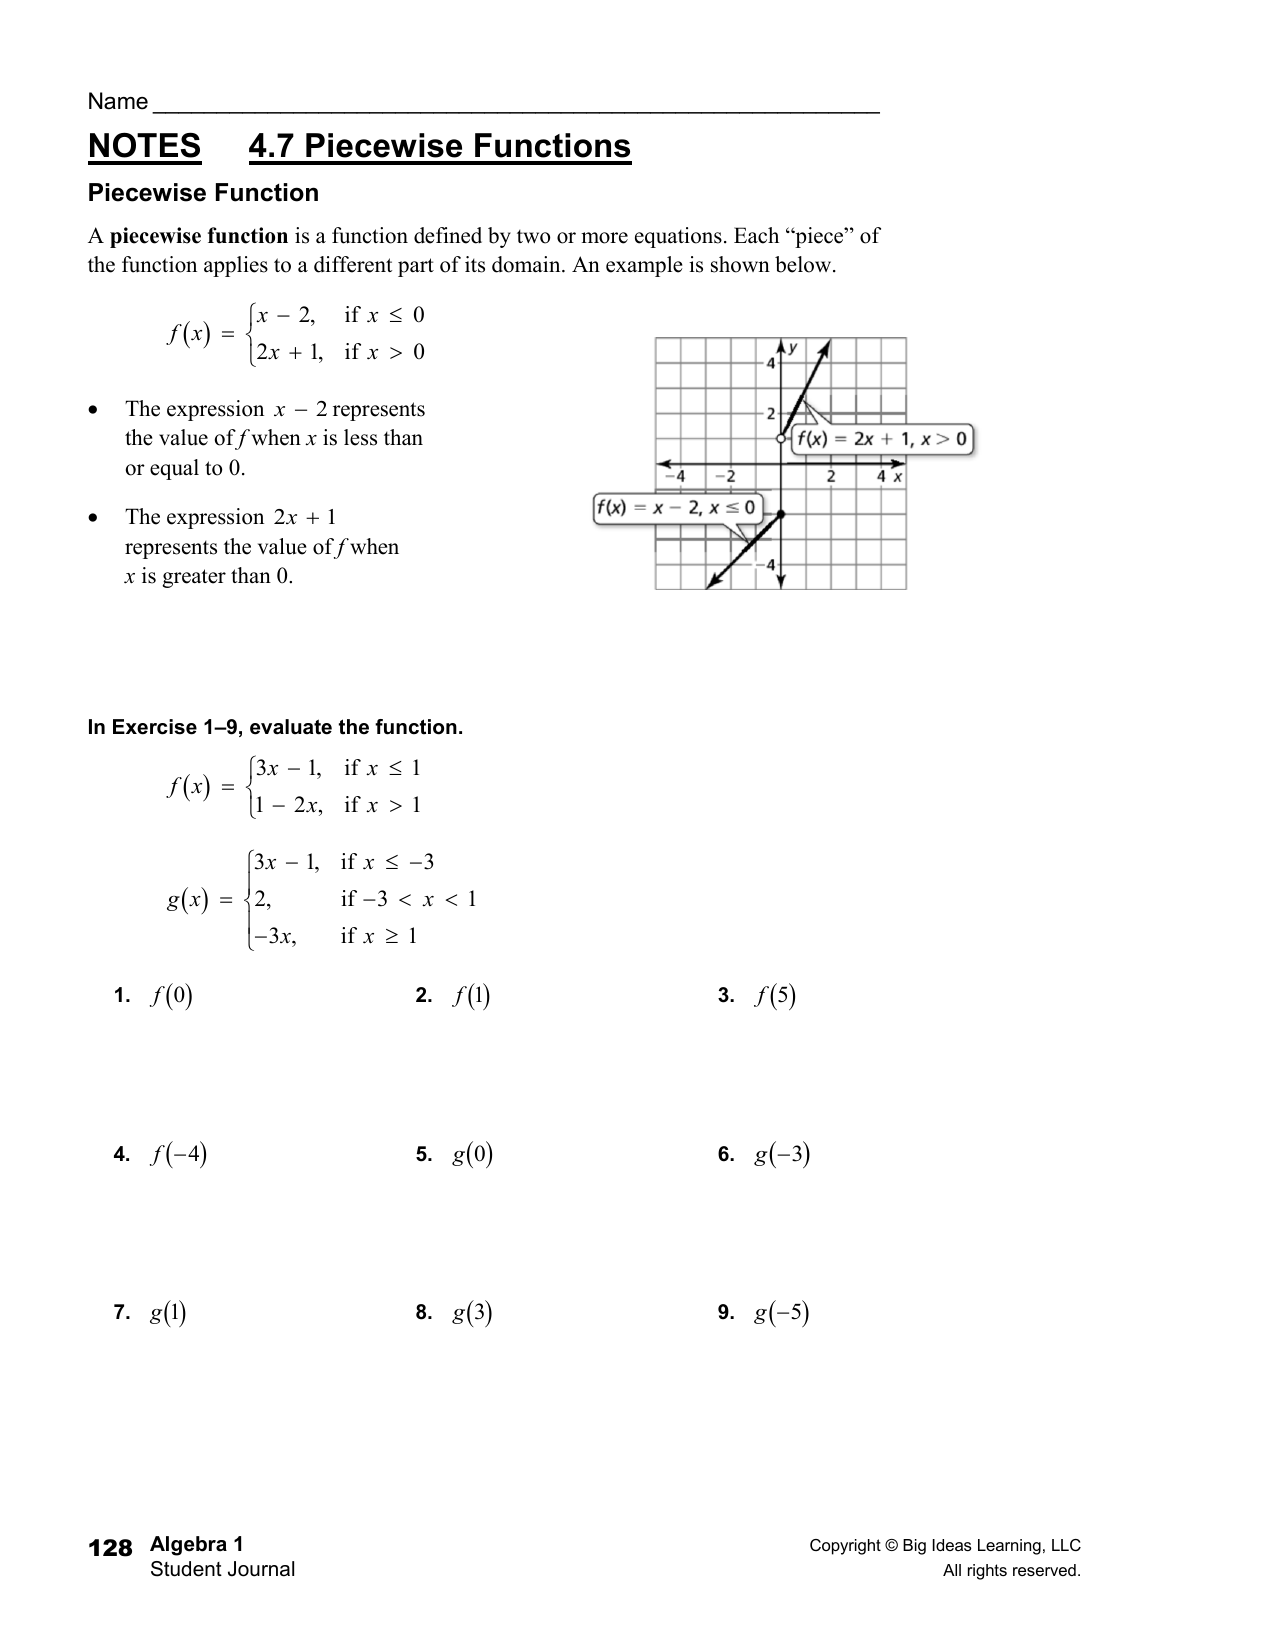 Worksheet Piecewise Functions Answer Key